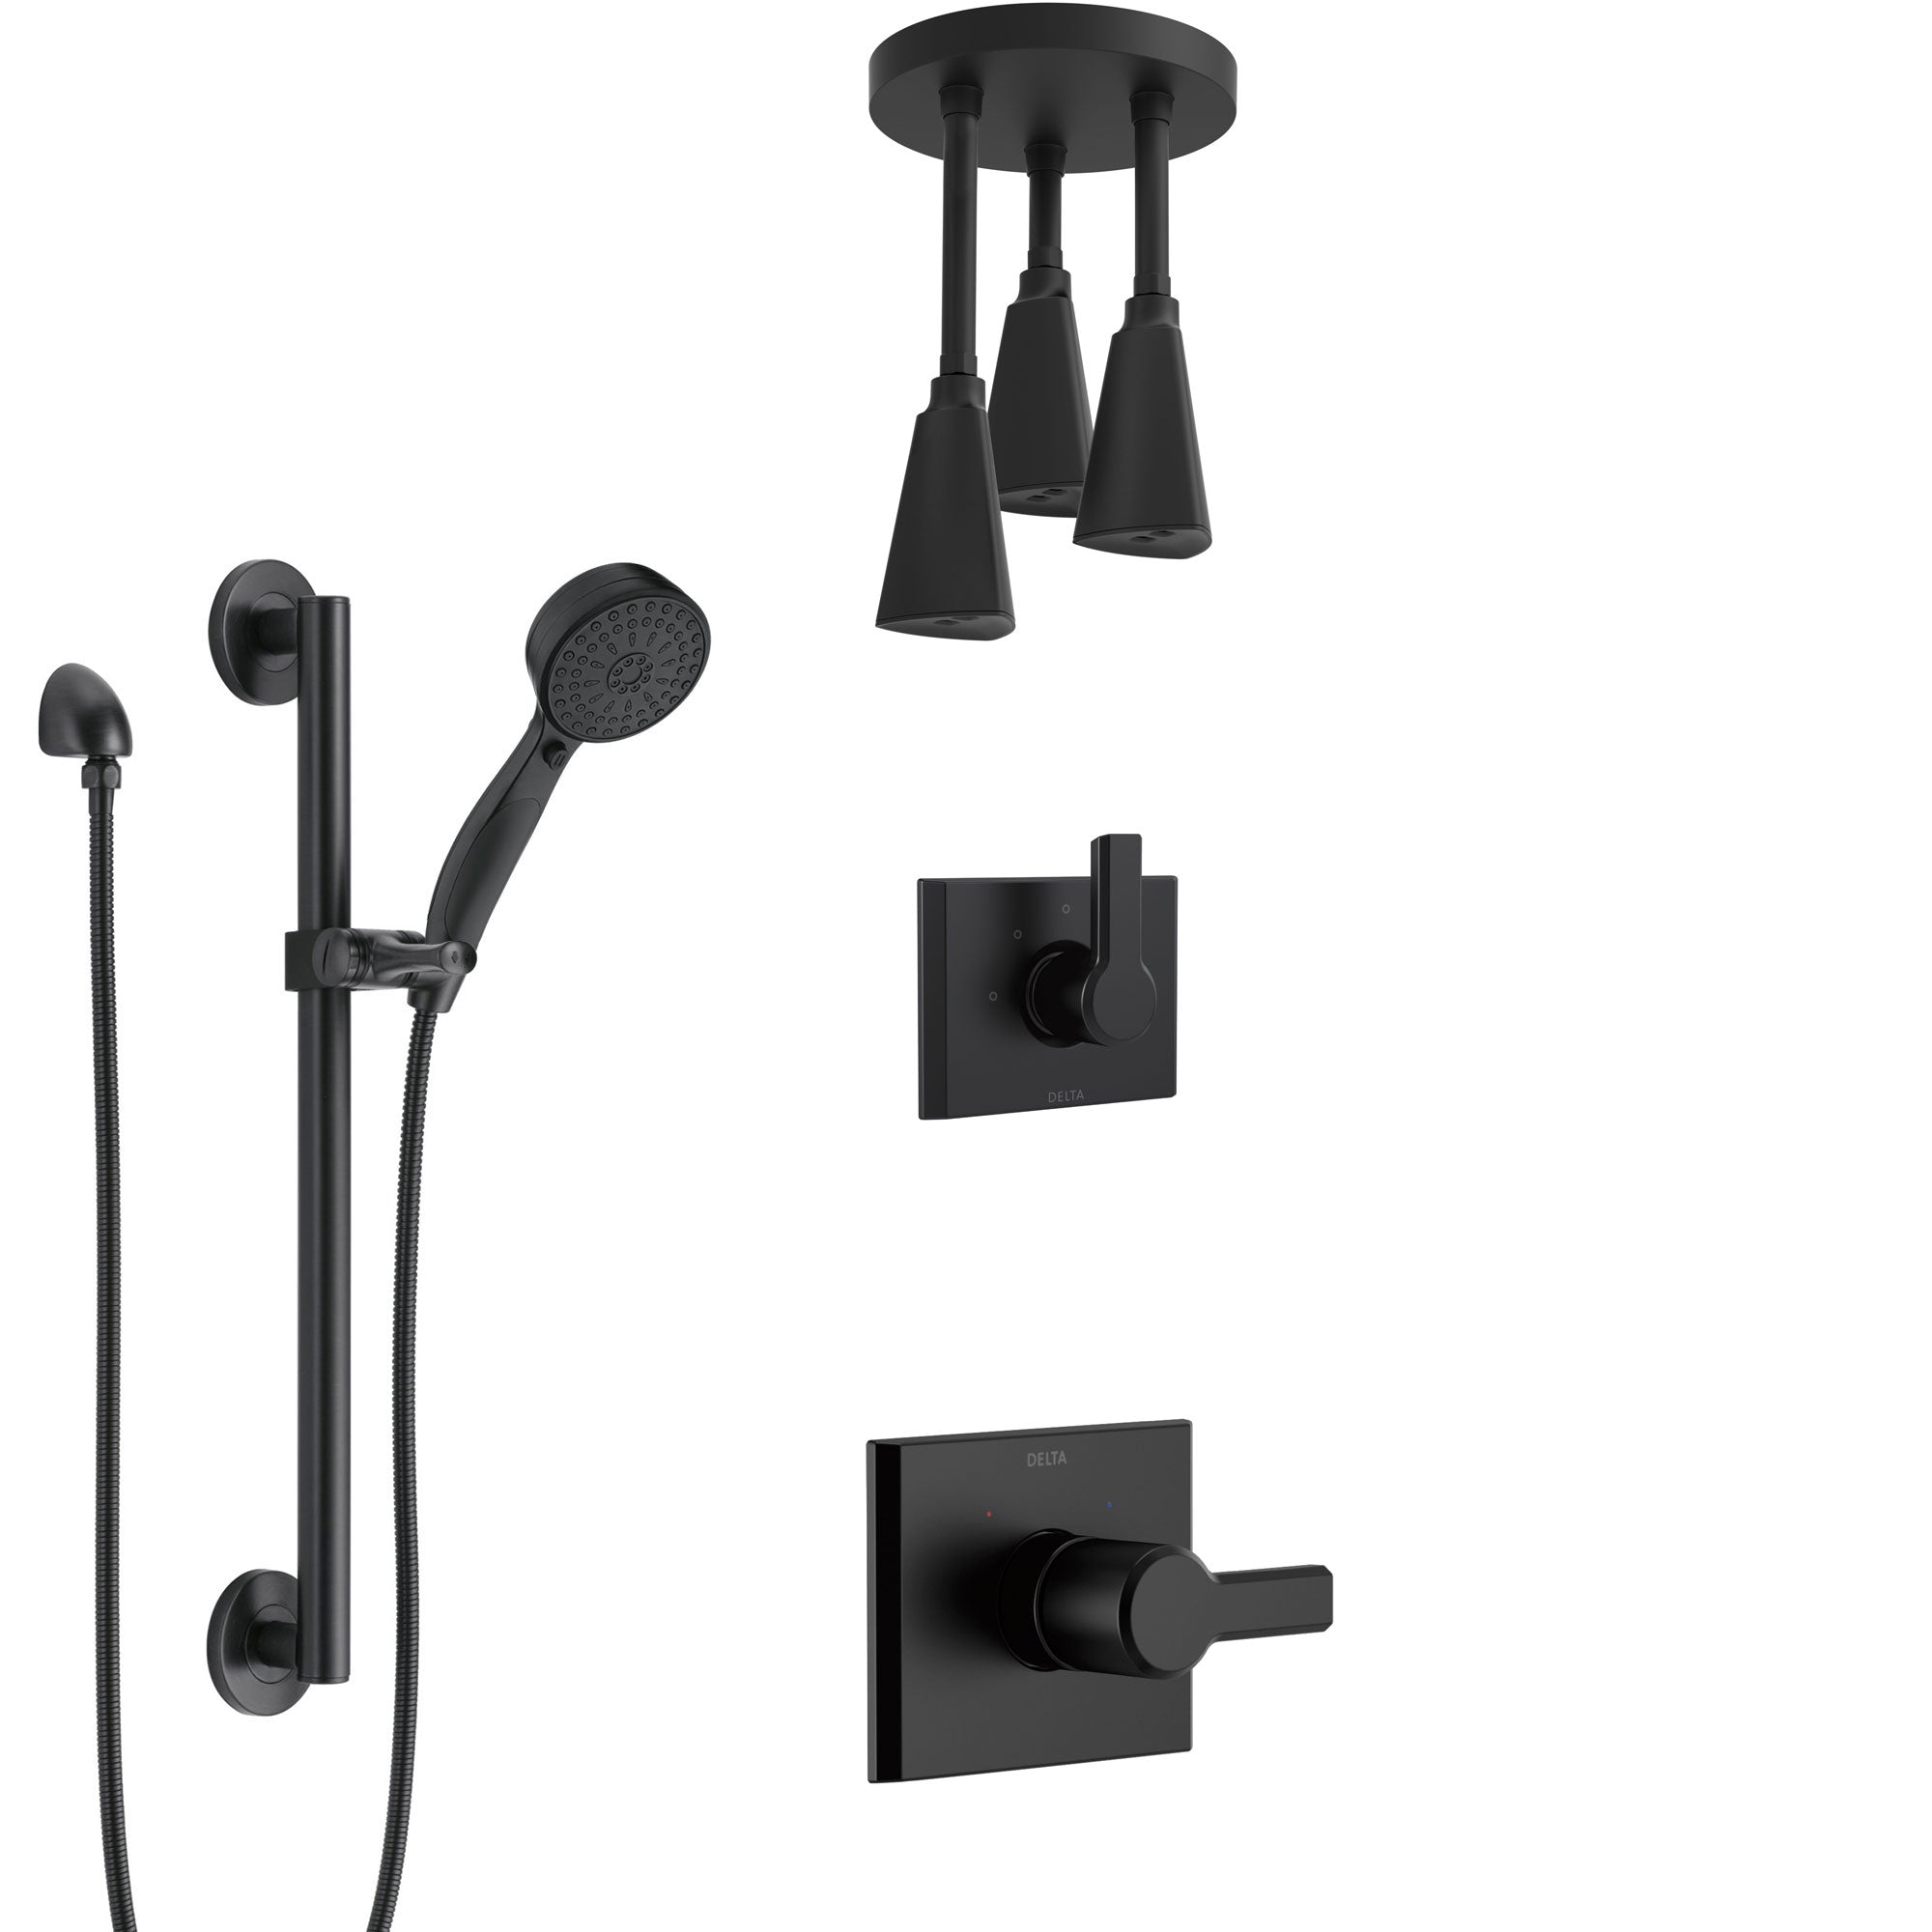 Delta Pivotal Matte Black Finish Modern Shower System with Triple Pendant Ceiling Mount Showerhead Fixture and Grab Bar Hand Sprayer Kit SS14993BL10